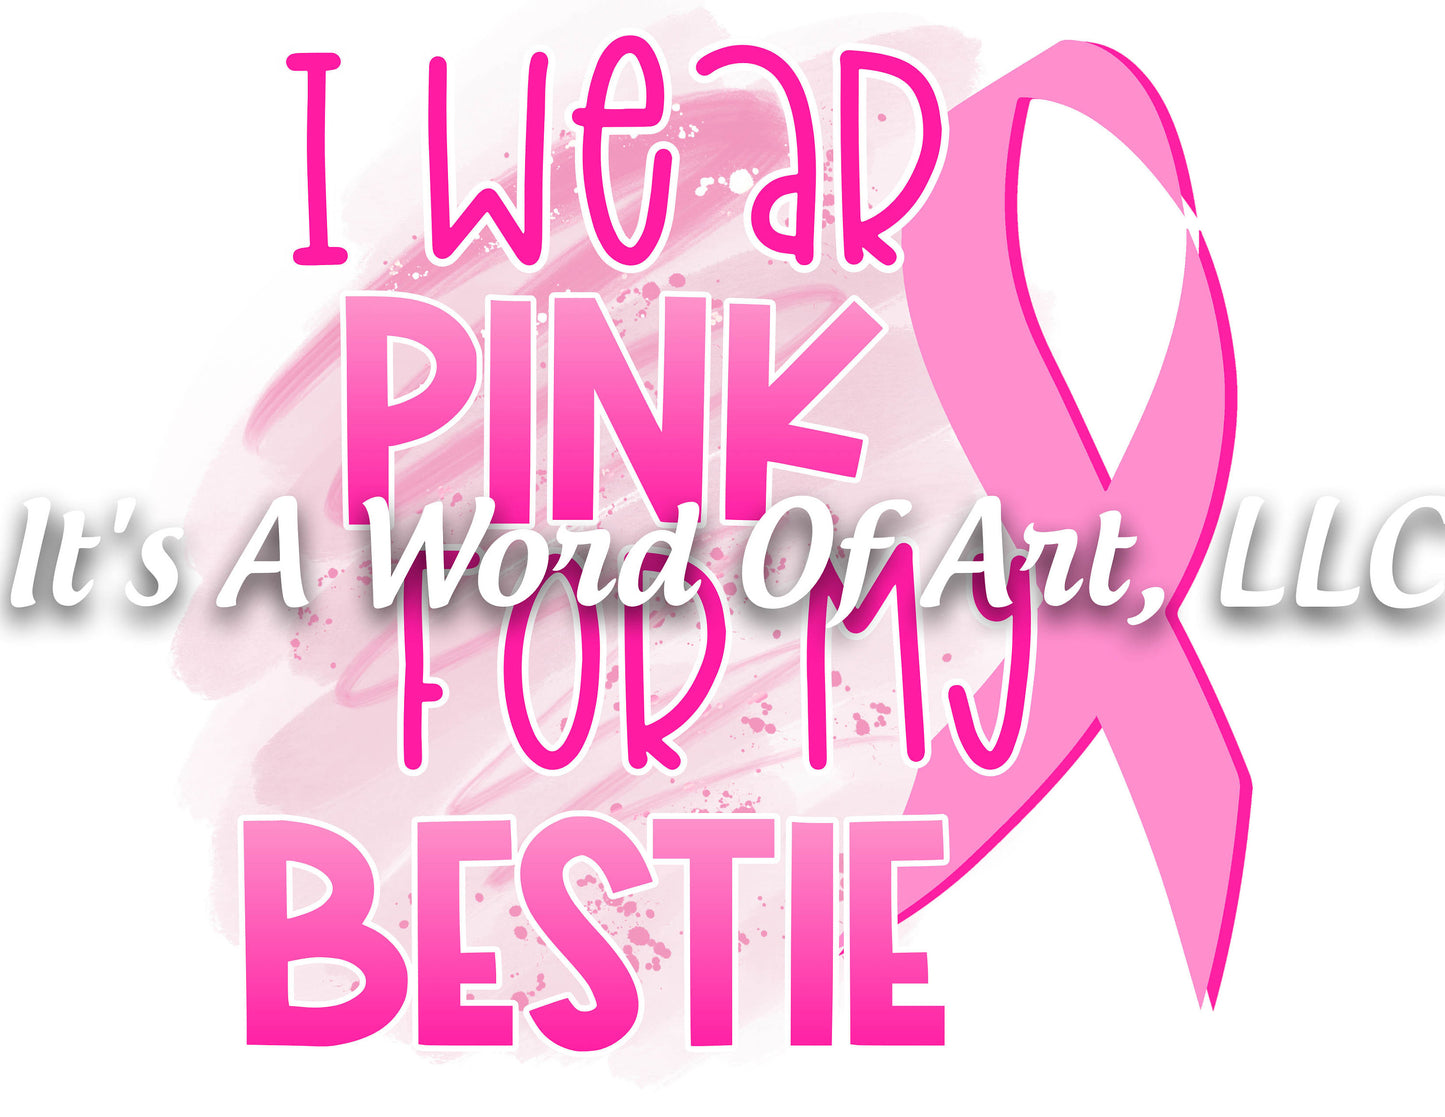 Breast Cancer Awareness 04 - I Wear Pink for My Bestie Awareness Ribbon - Sublimation Transfer Set/Ready To Press Sublimation Transfer